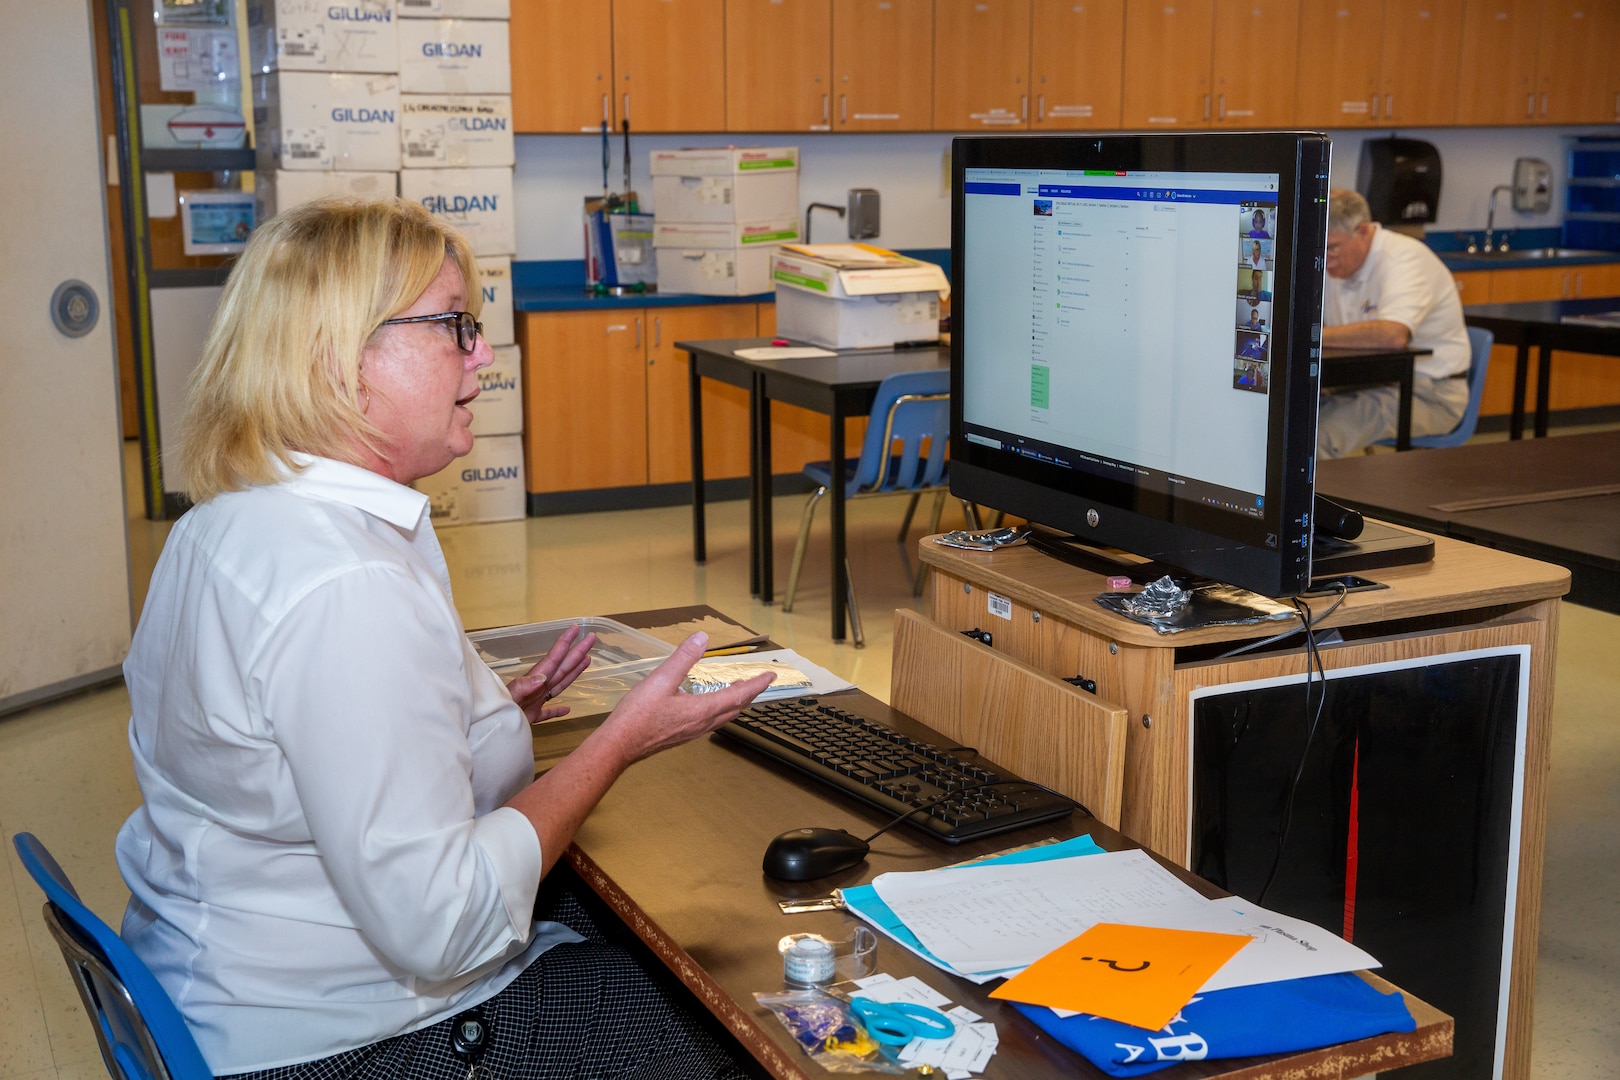 A STARBASE Victory teacher teaches one of her virtual classes using the learning management system Schoology.